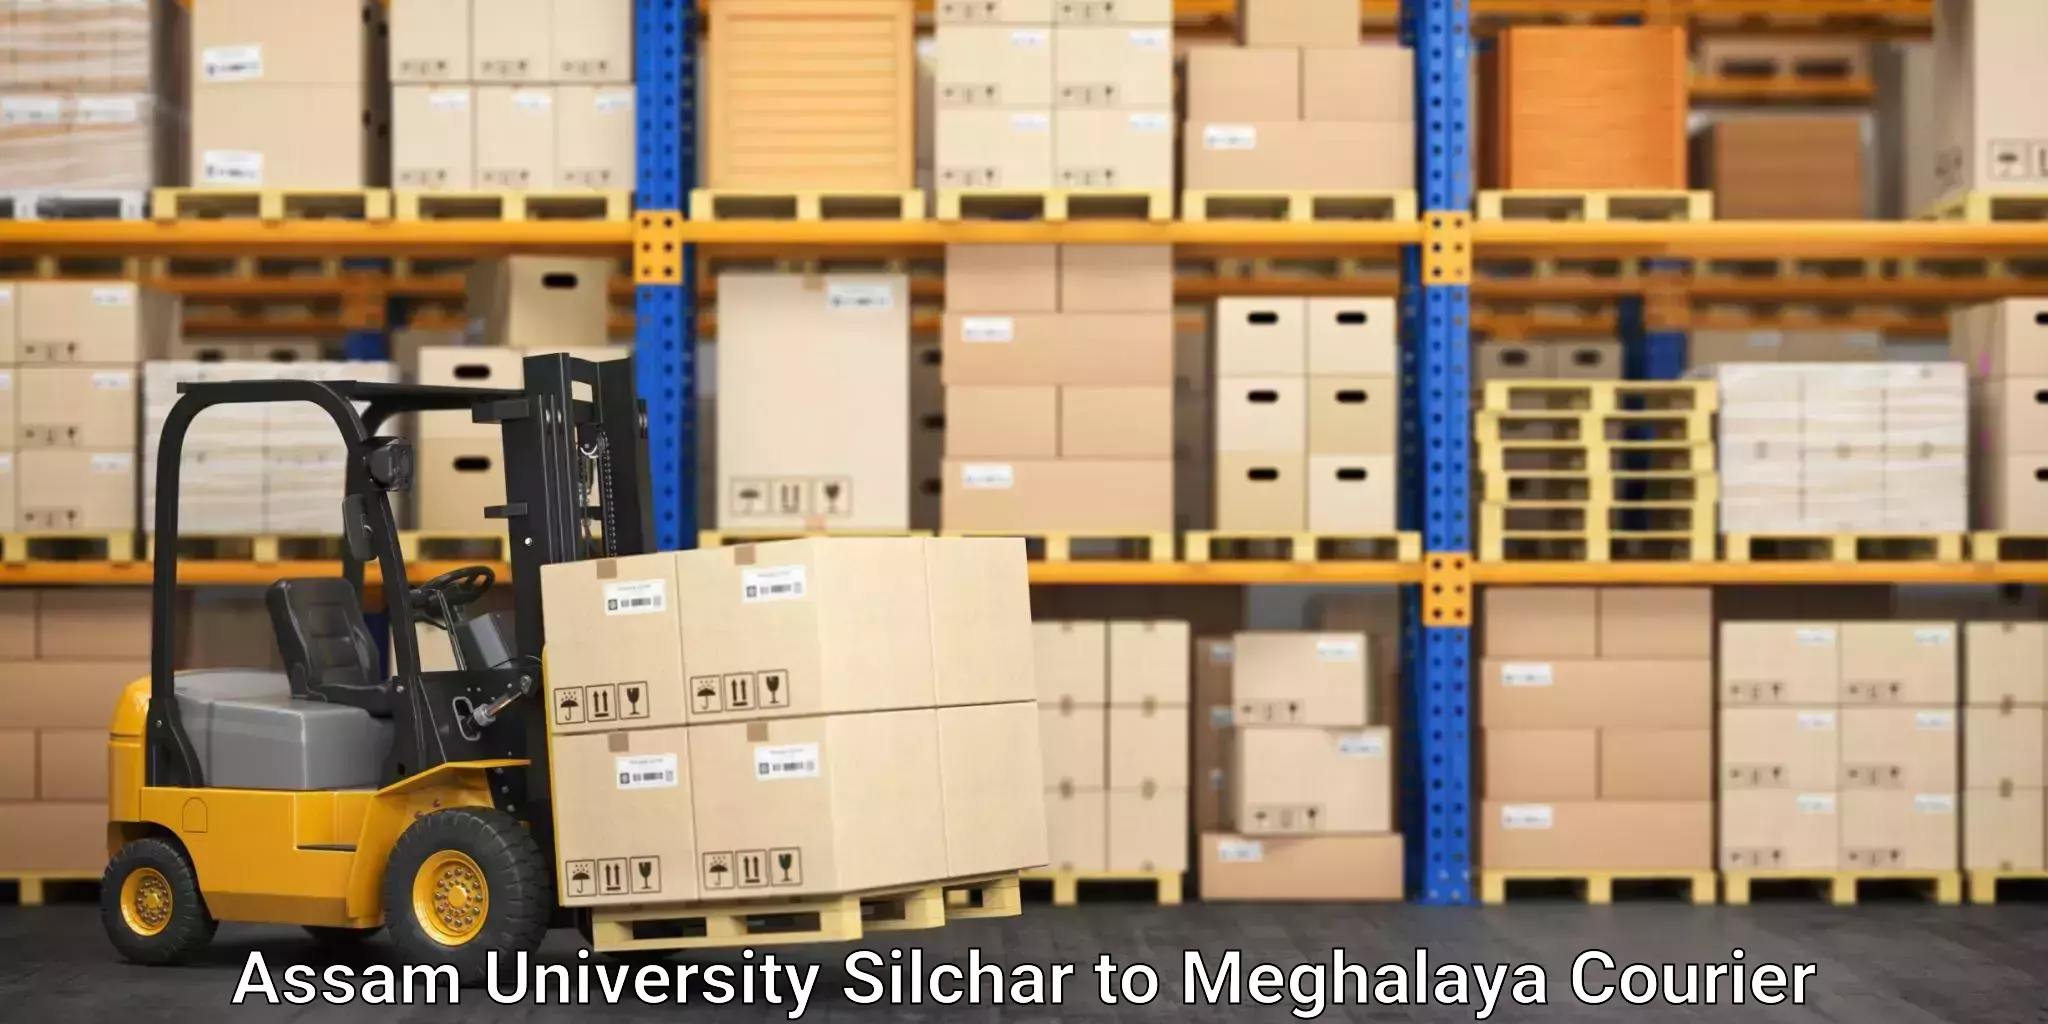 Express mail solutions Assam University Silchar to Shillong